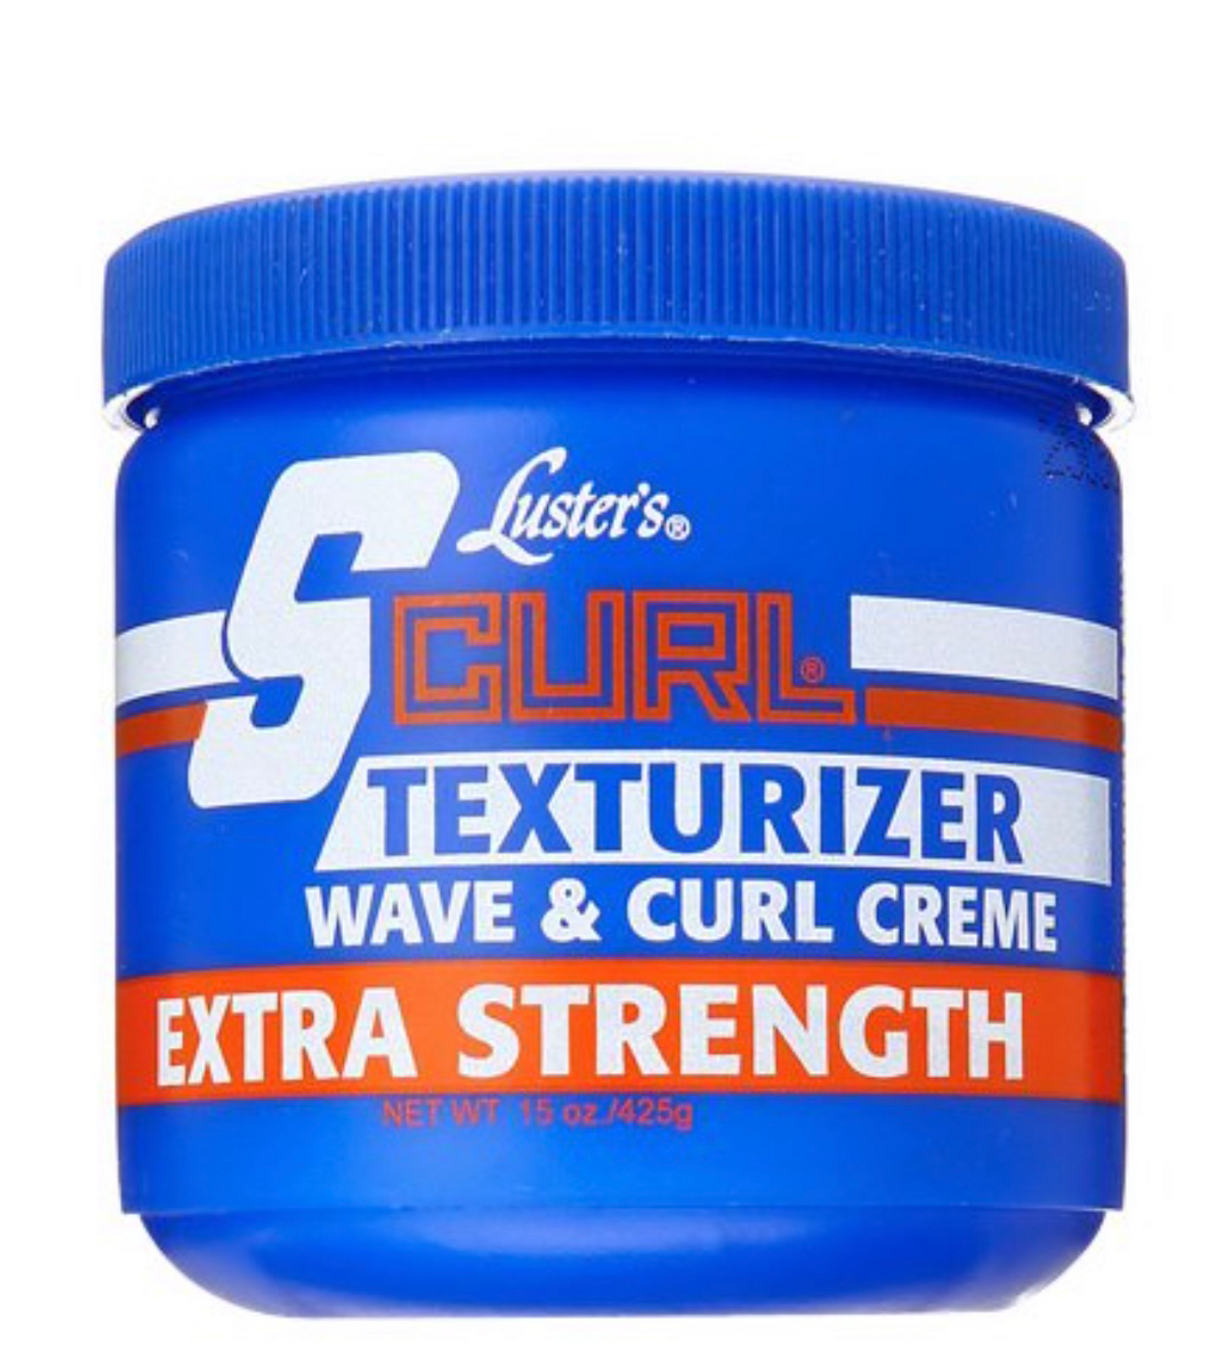 Luster's S-Curl Texturizer Wave And Curl Creme - Extra Strength